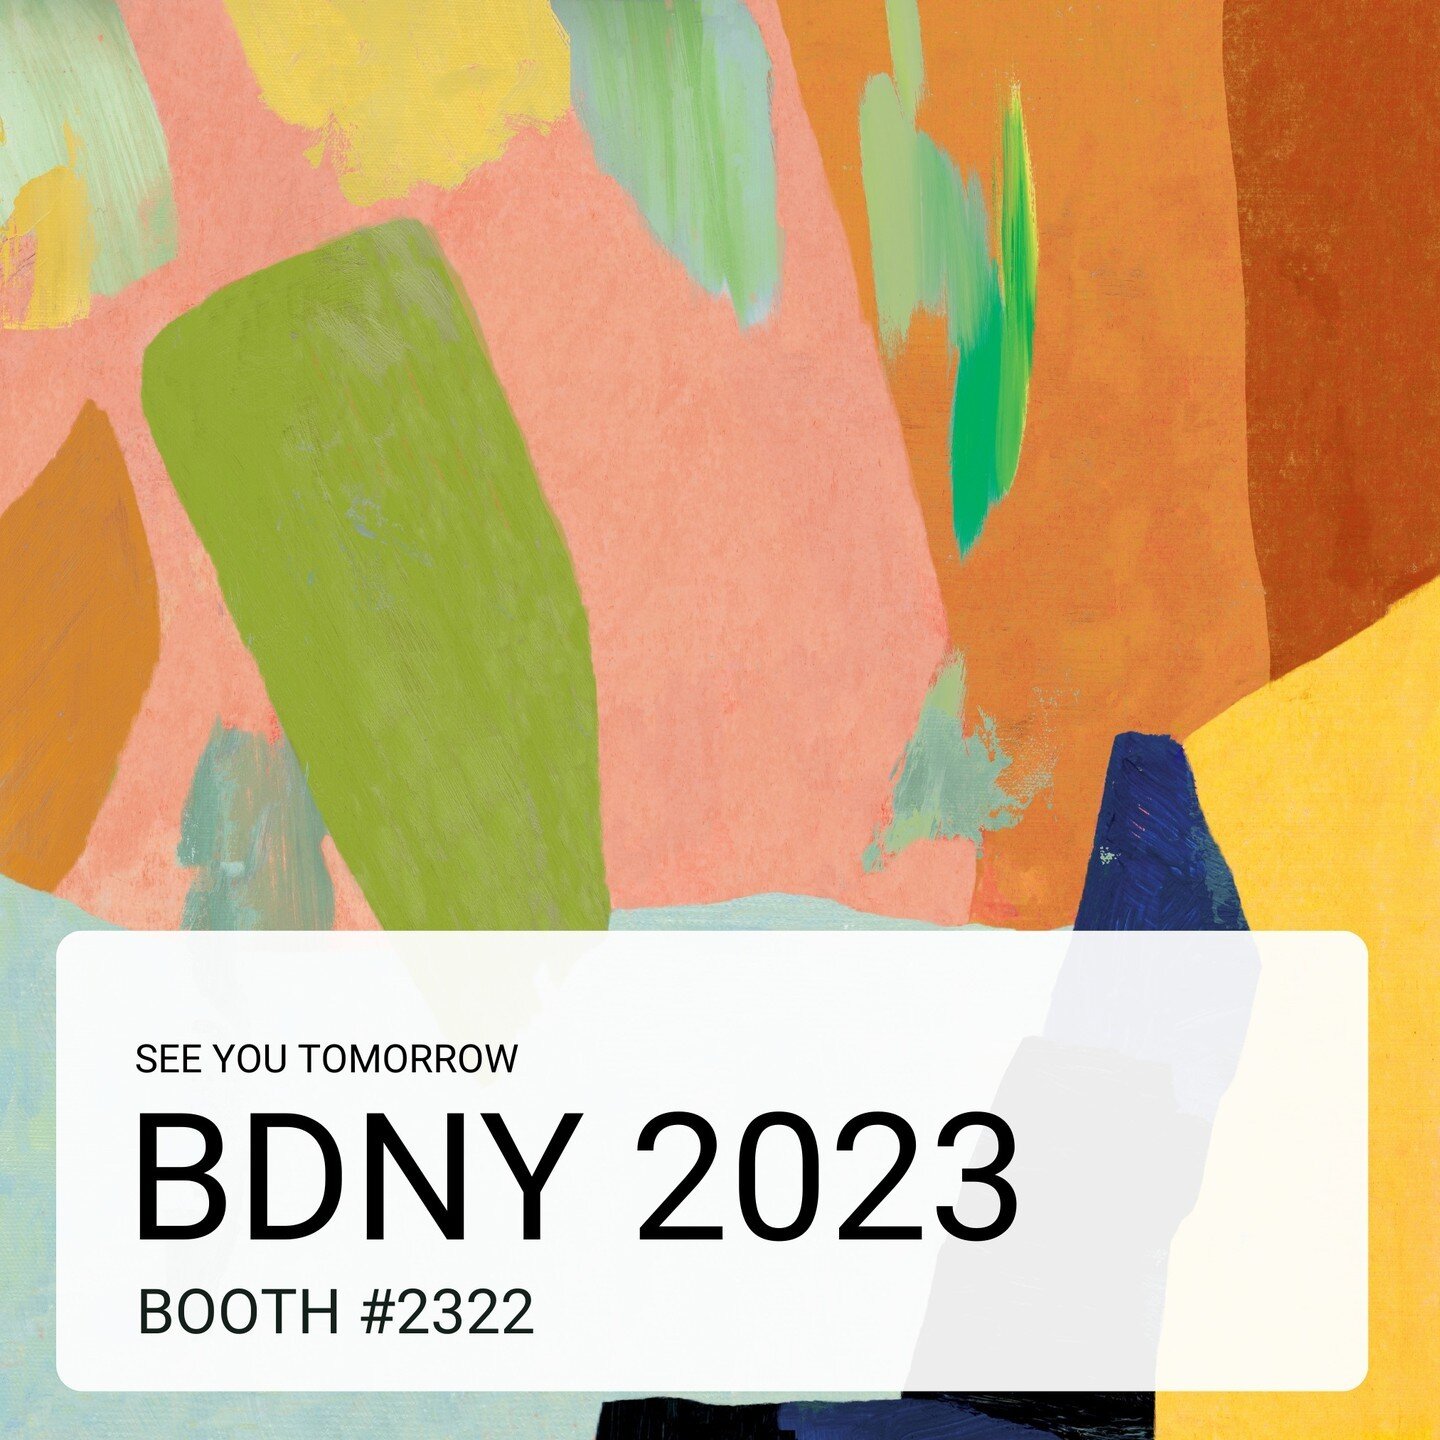 We extend a warm invitation for you to visit us at #BDNY 2023, booth #2322, and discover the enchantment of our latest art collection. With a treasure trove of fresh creations and boundless inspiration, we can't wait to immerse you in the world of ar